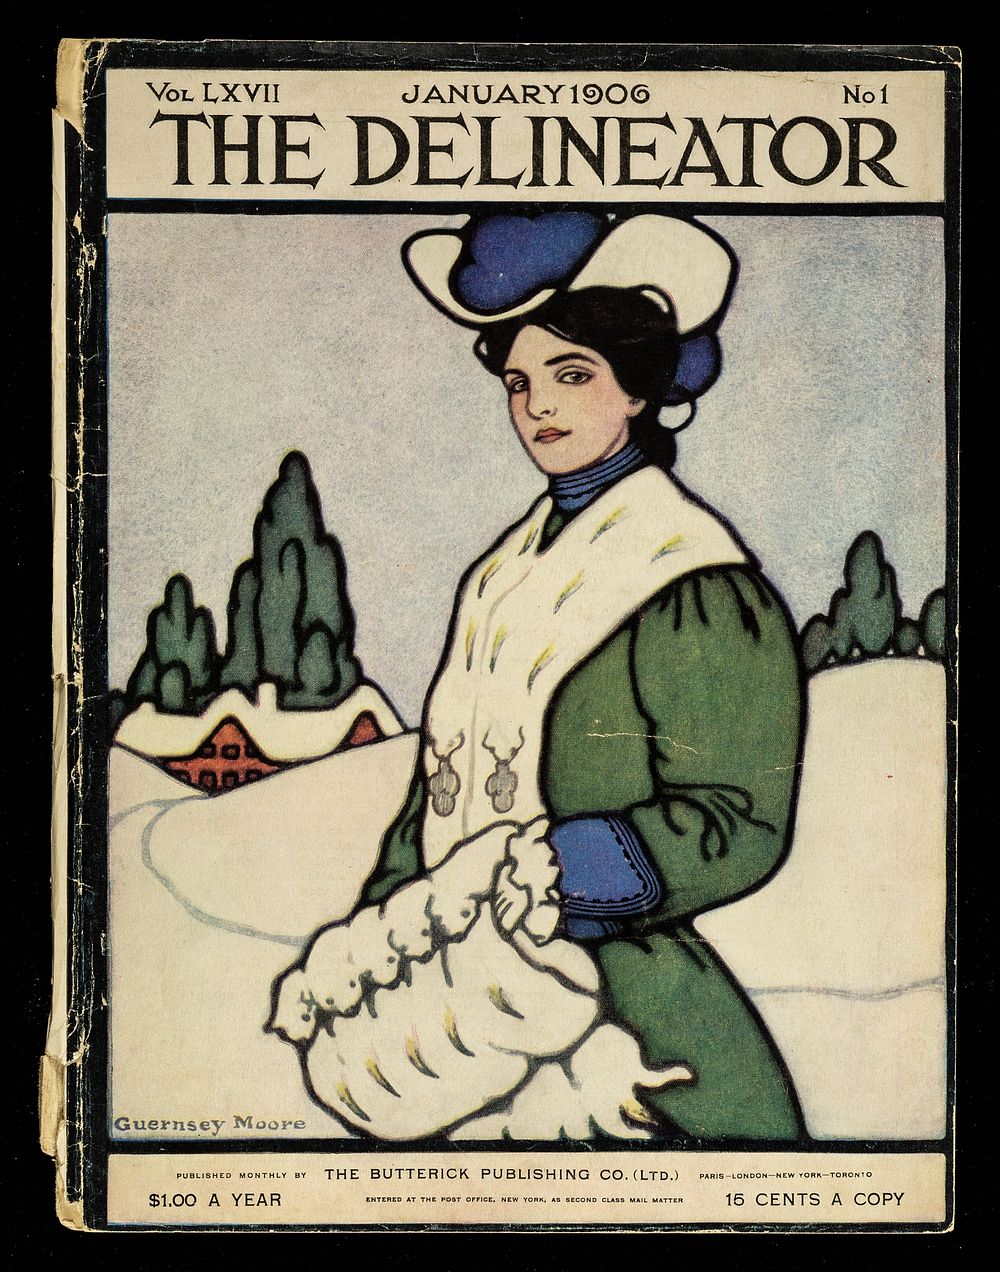 The delineator. Vol.LXVII, no.1, January 1906 : [cover only] / The Butterick Publishing Co. (Ltd.).